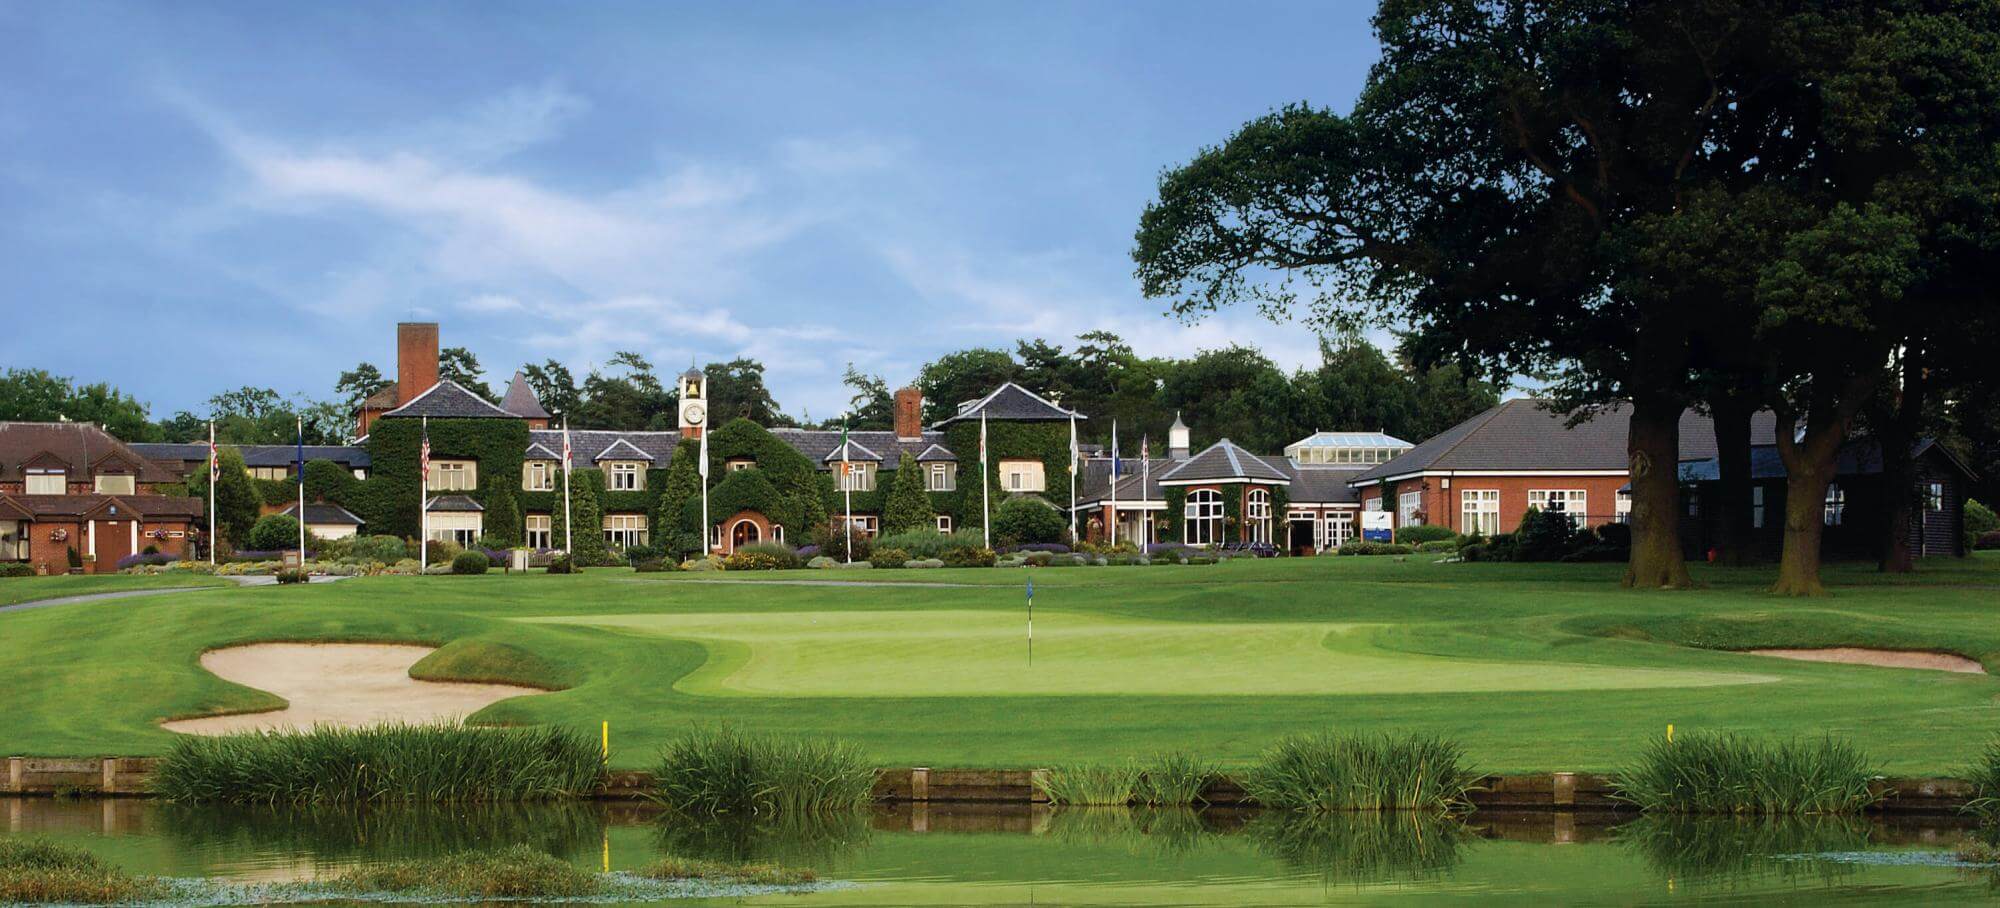 The belfry hotel  resorts picturesque hotel situated in incredible west midlands